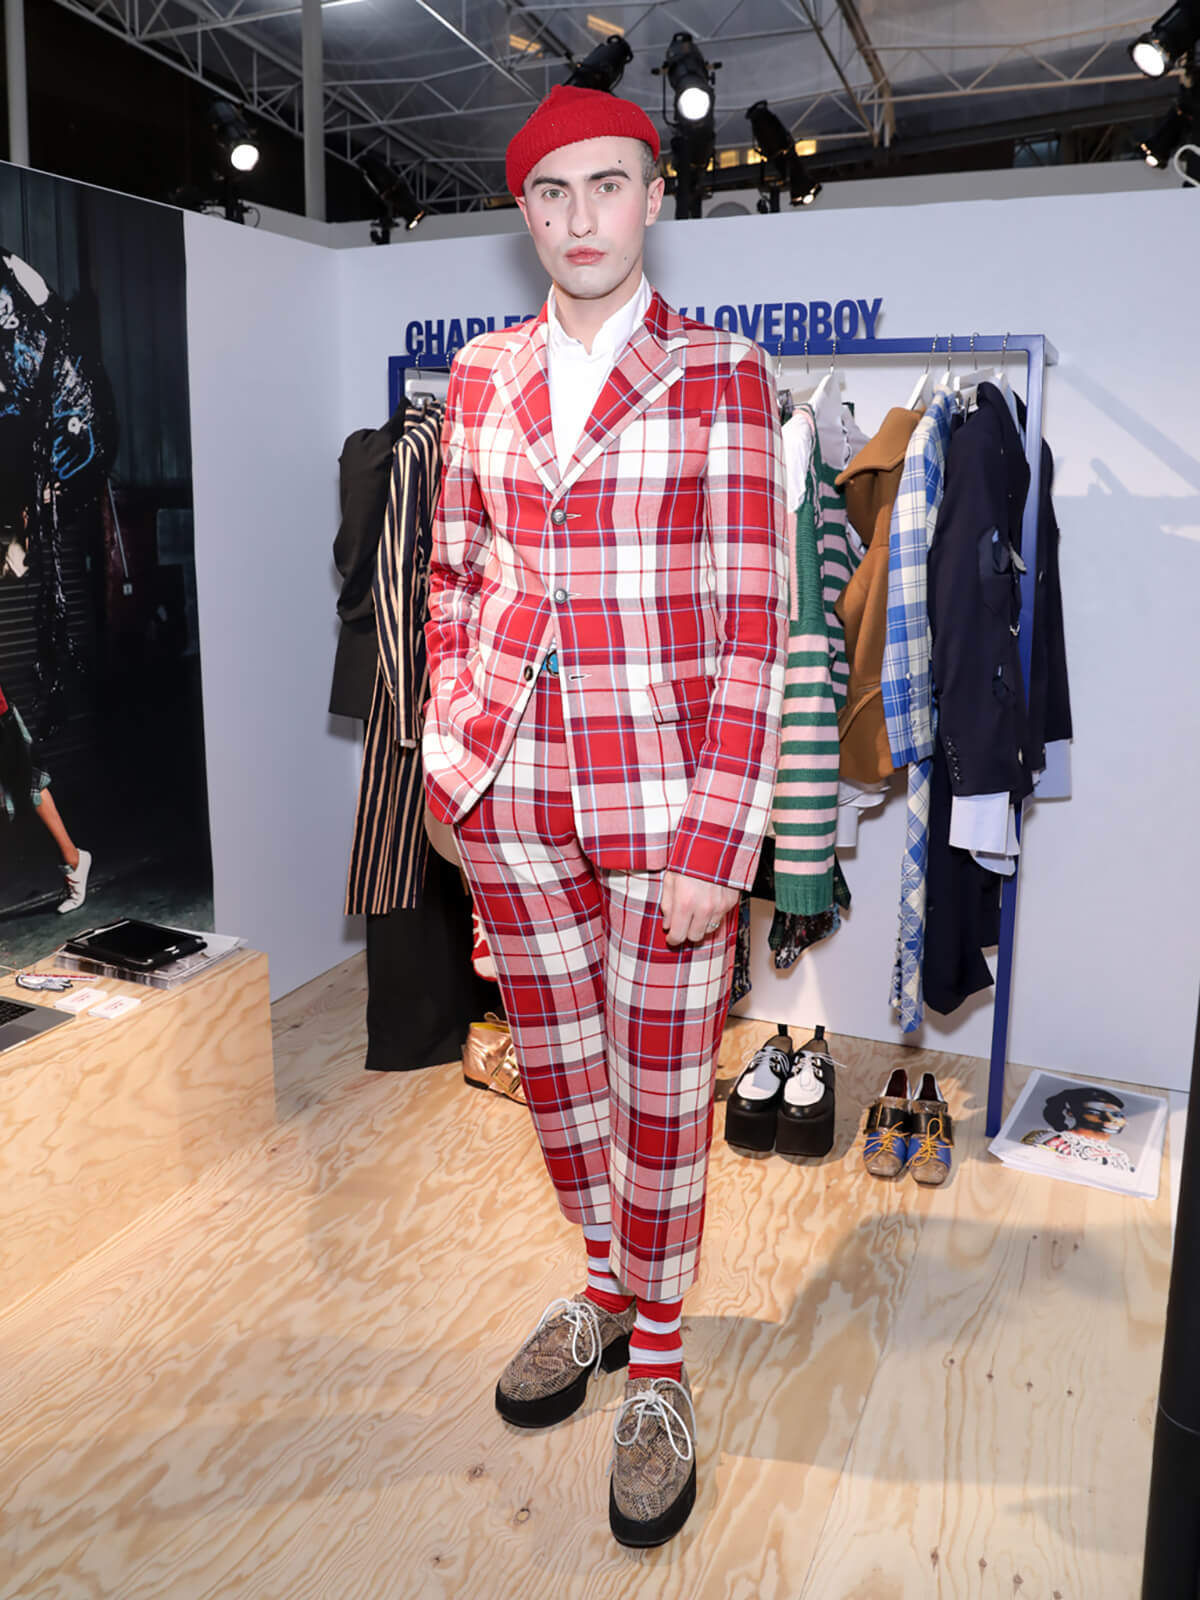 Menswear designer Charles Jeffrey pictured in red chequered suit in front of rail of clothing